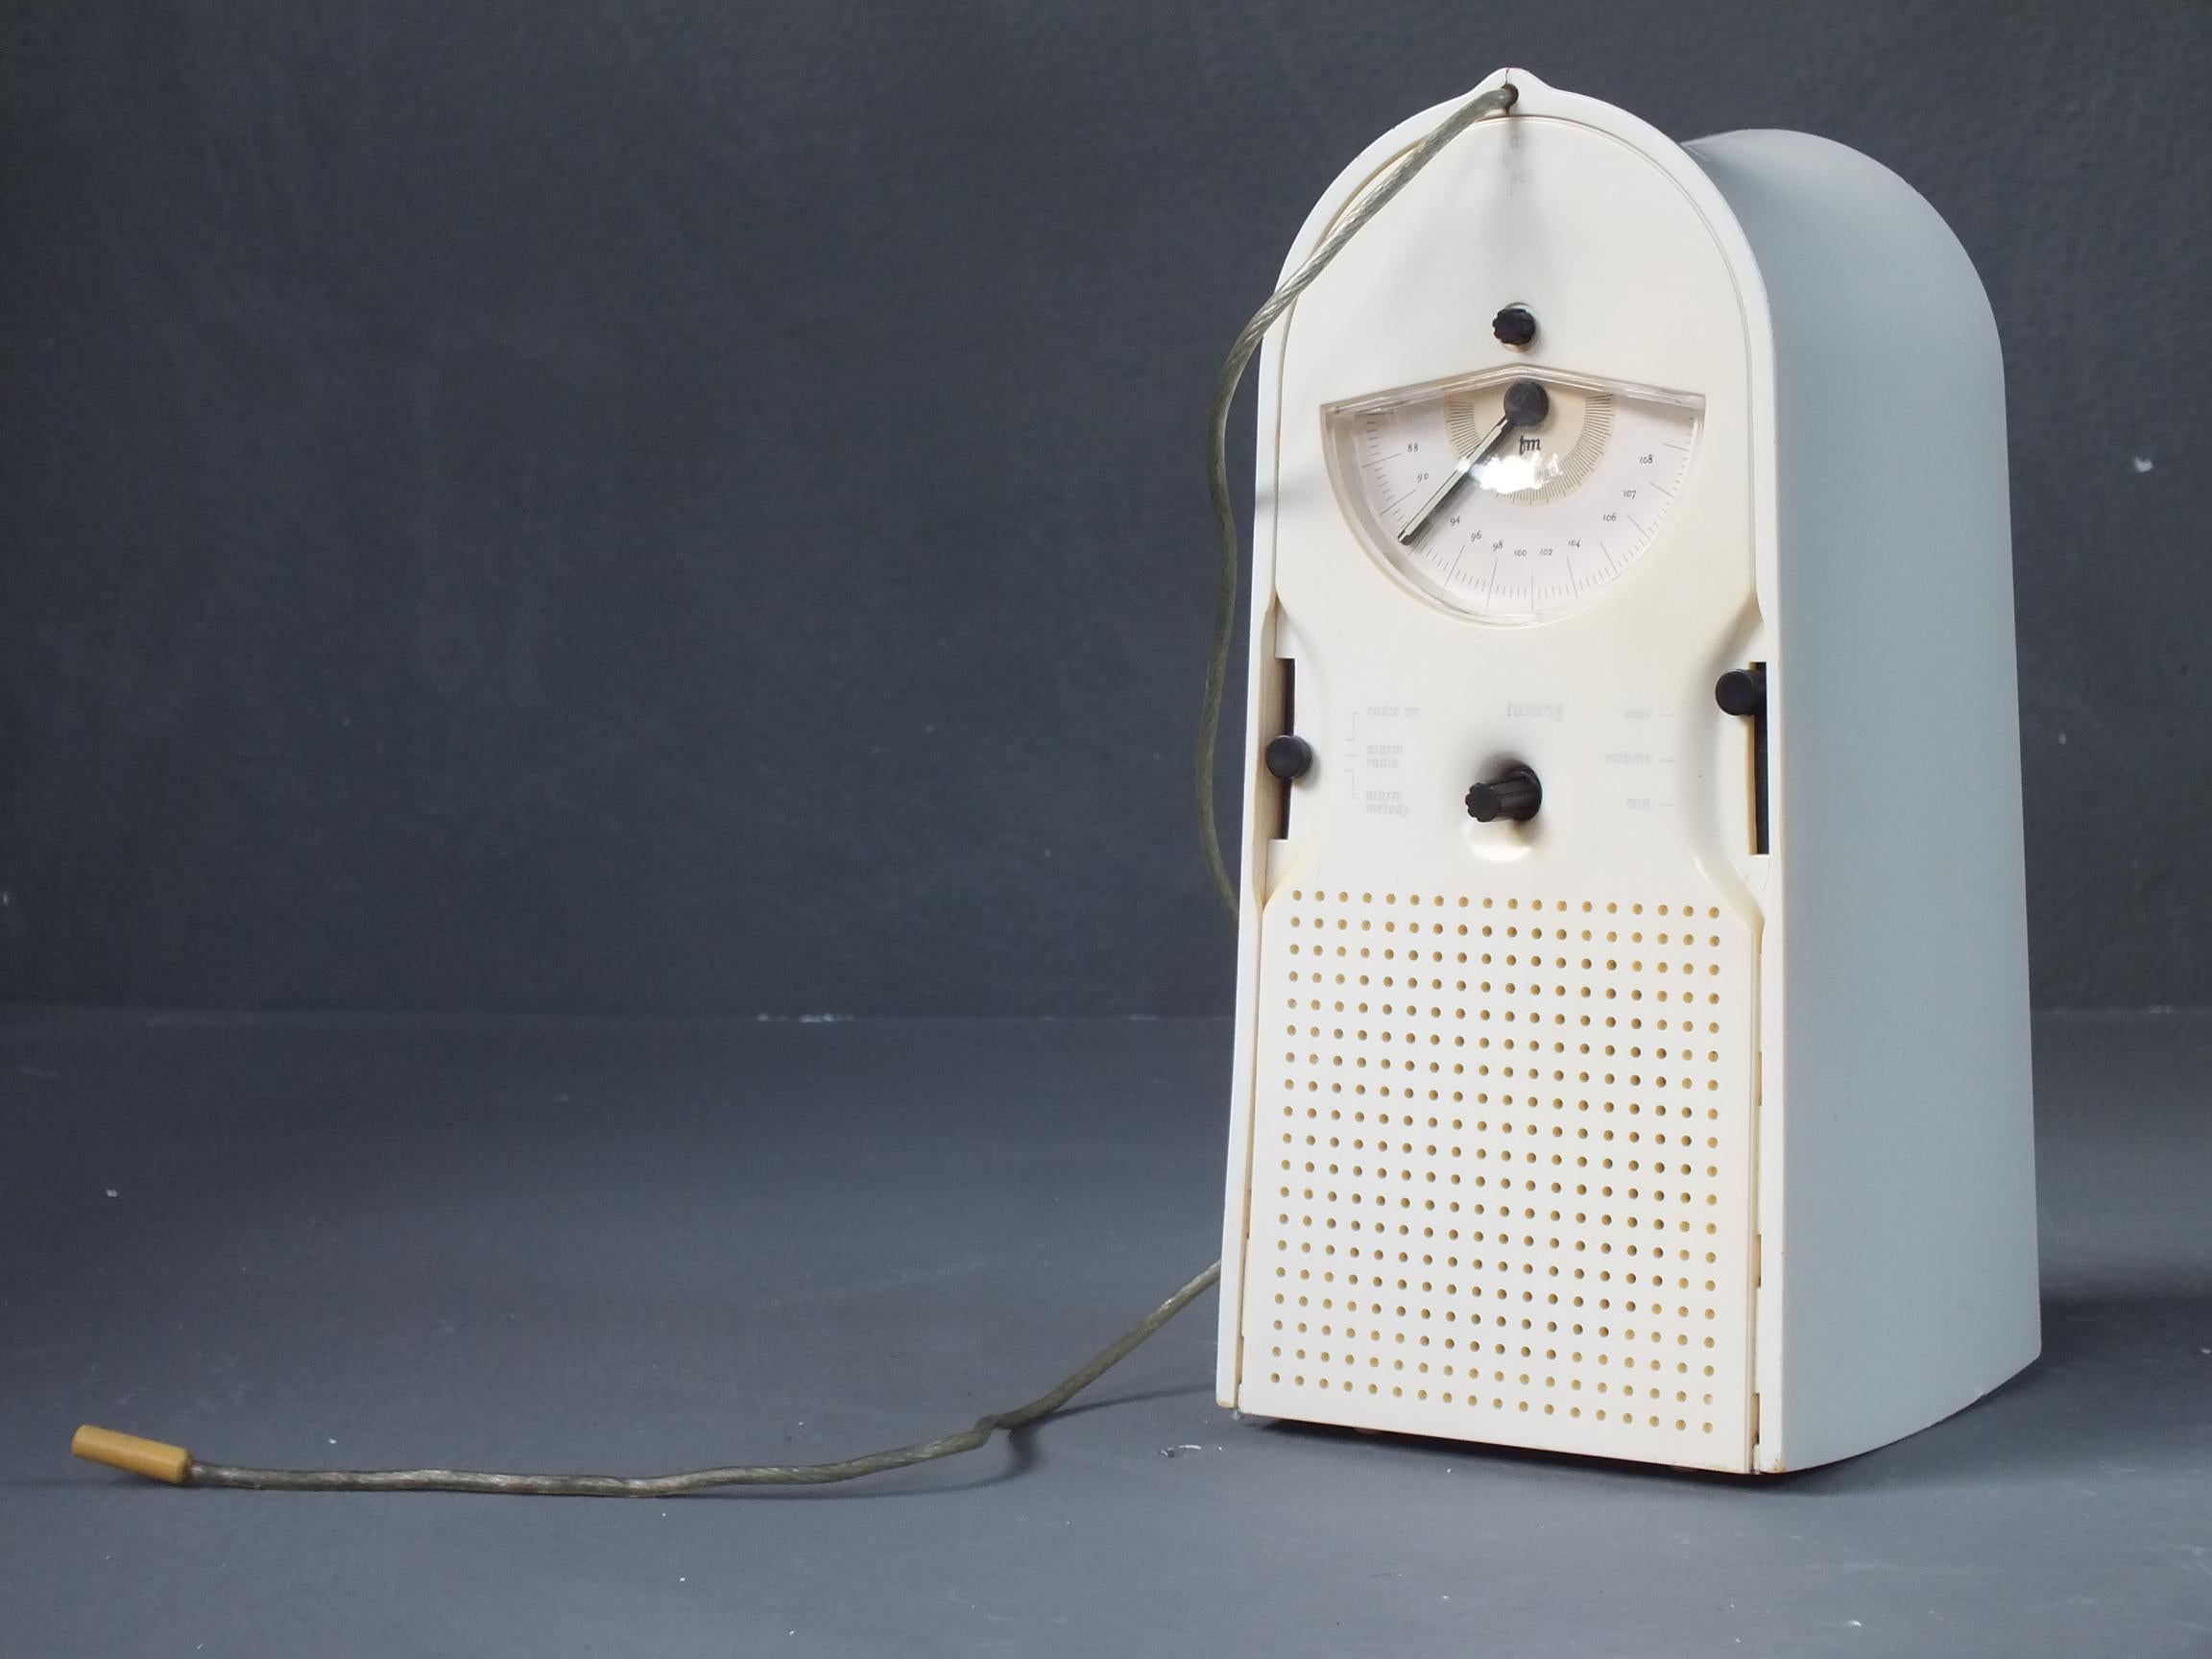 Thomson Prod. Alessi Clock Radio Coo Coo by Pilippe Starck Design Year 1994 In Good Condition For Sale In Biella, IT